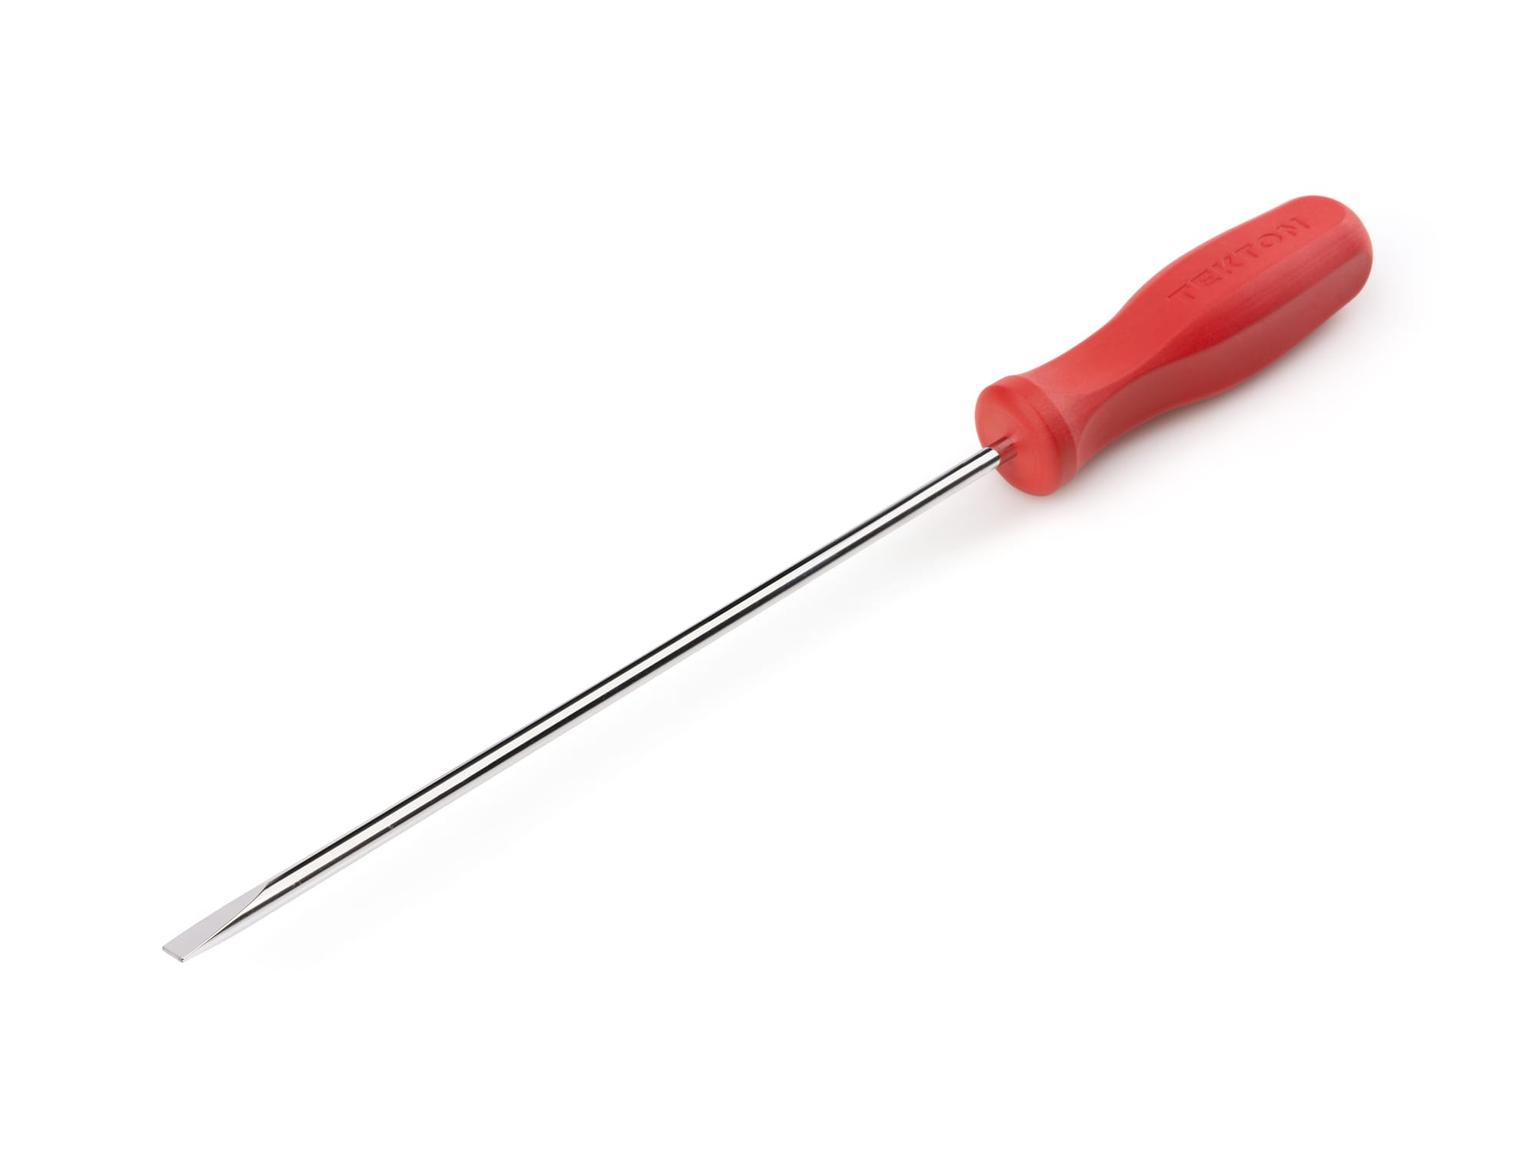 TEKTON DSE34188-T Long 3/16 Inch Slotted Hard Handle Screwdriver